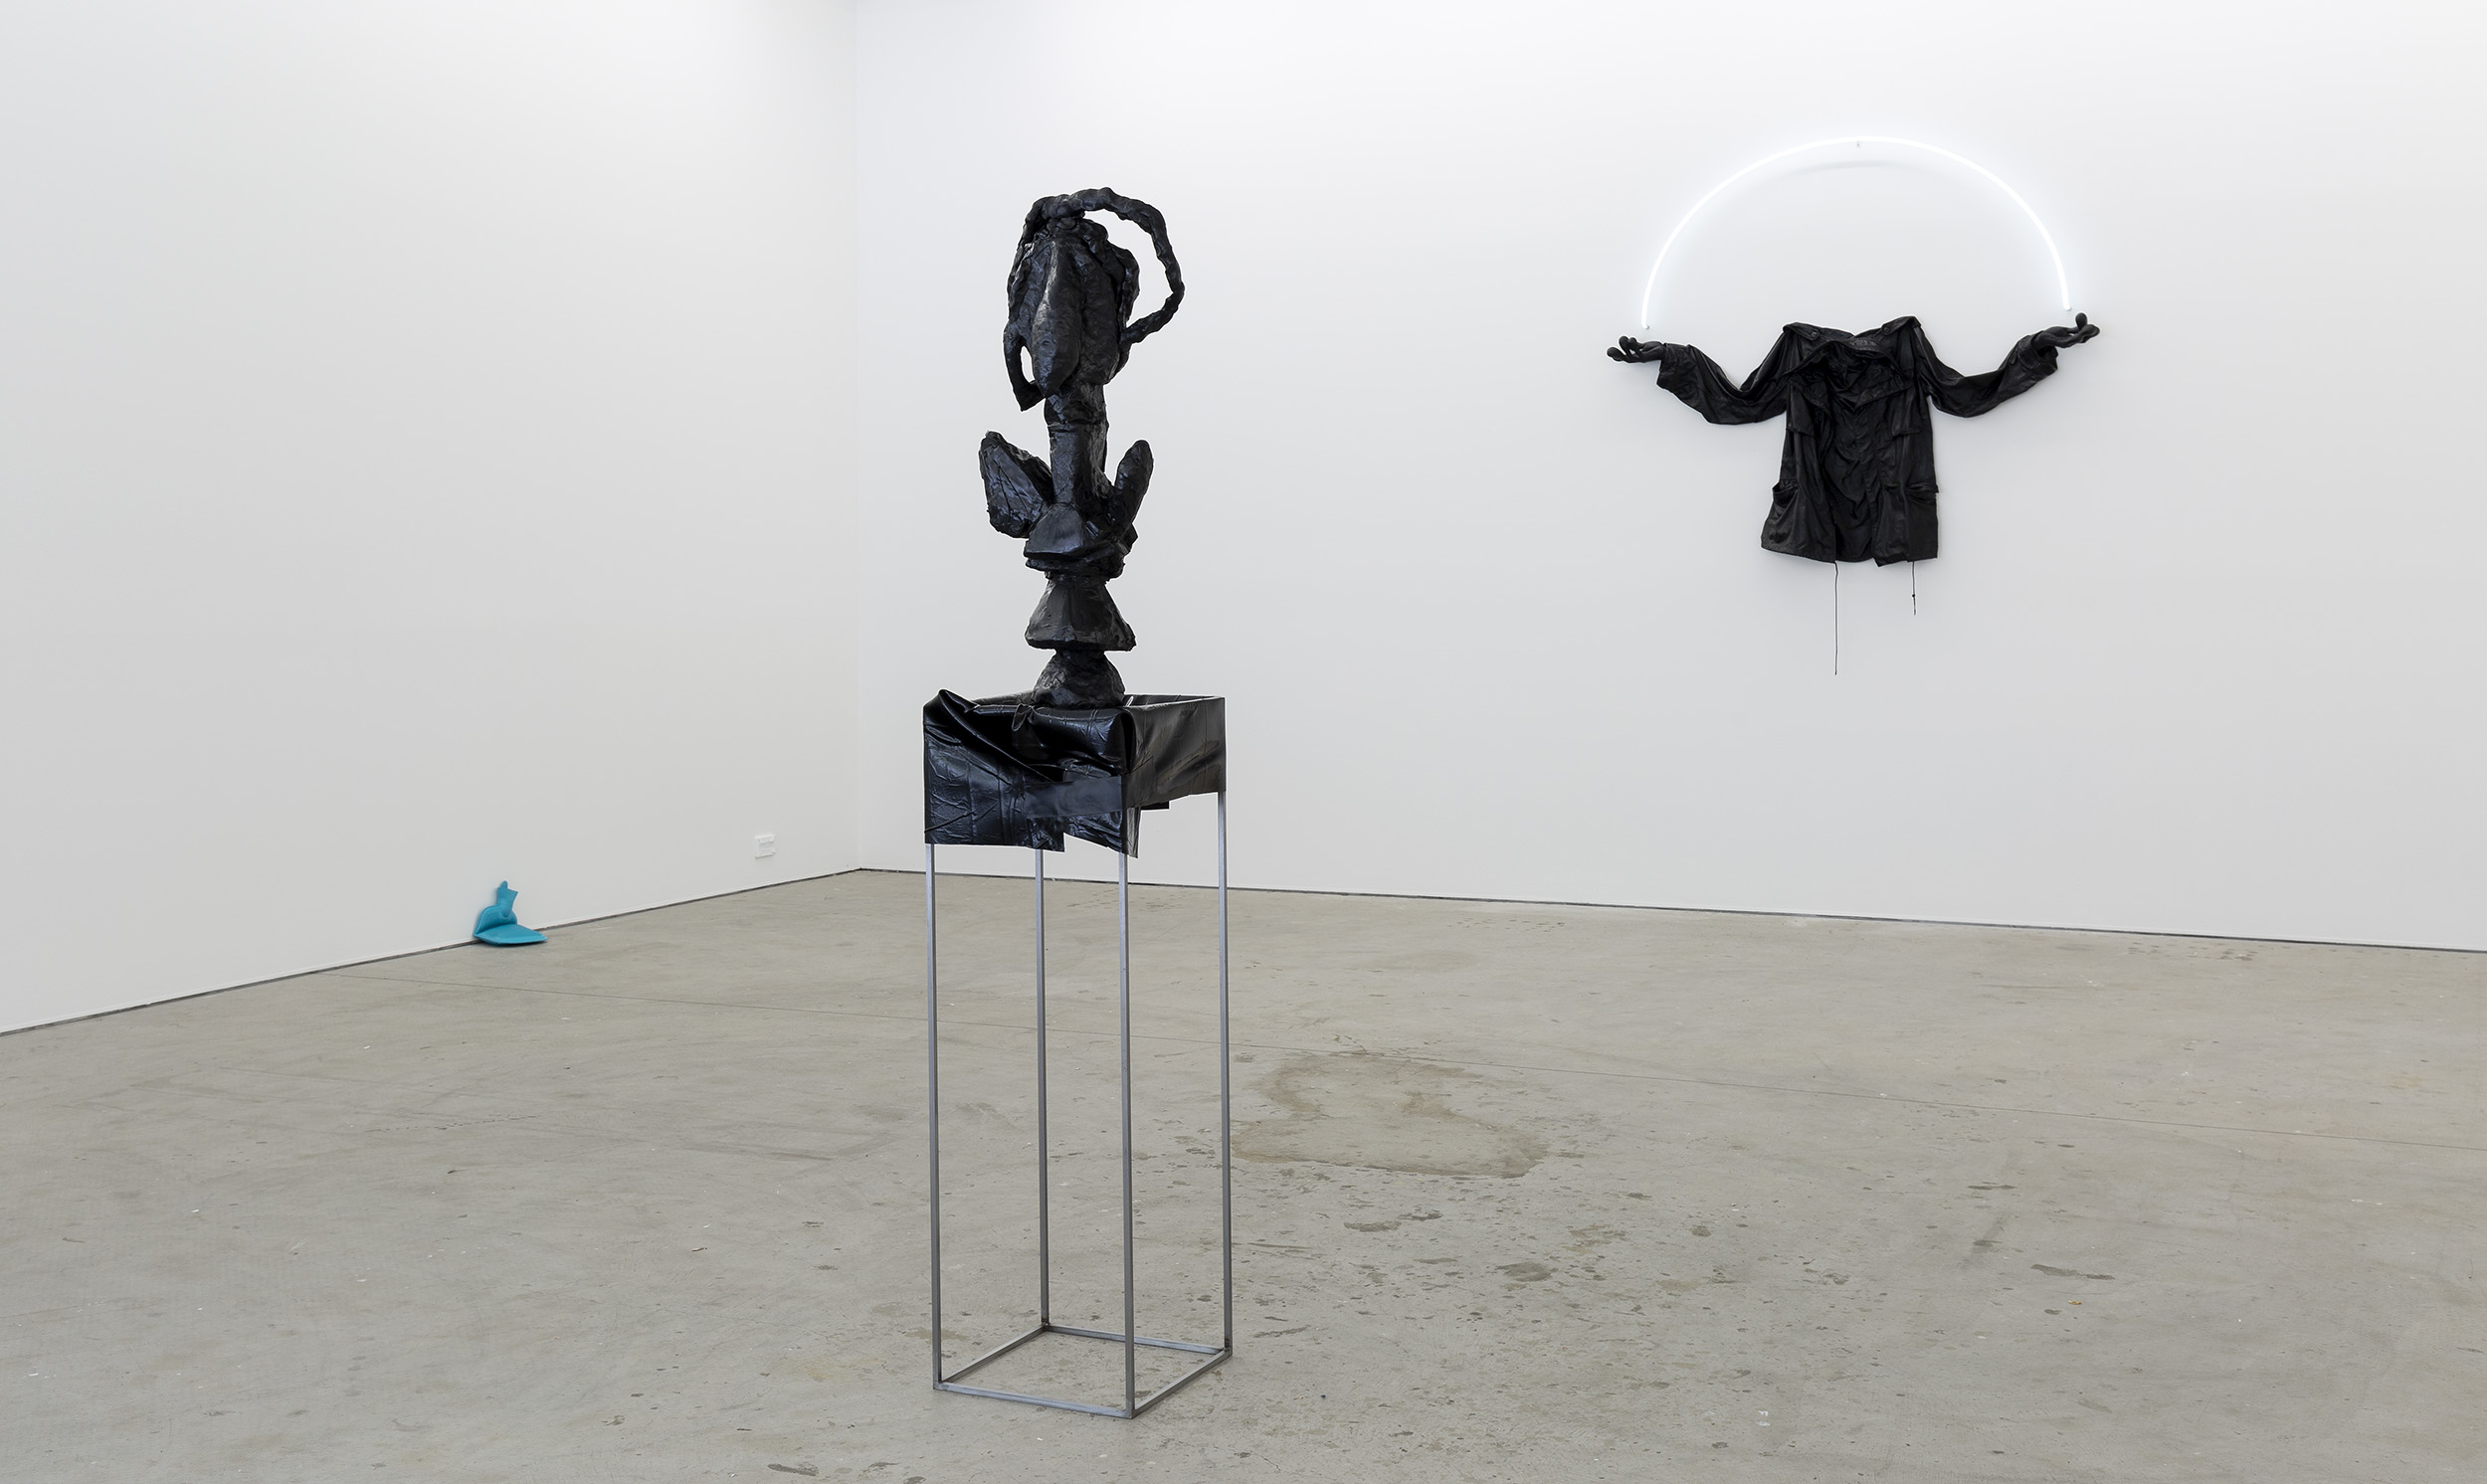 Installation image of Rob McLeish's HEADLESS at Gertrude Contemporary, 2021. Photo: Christian Capurro.